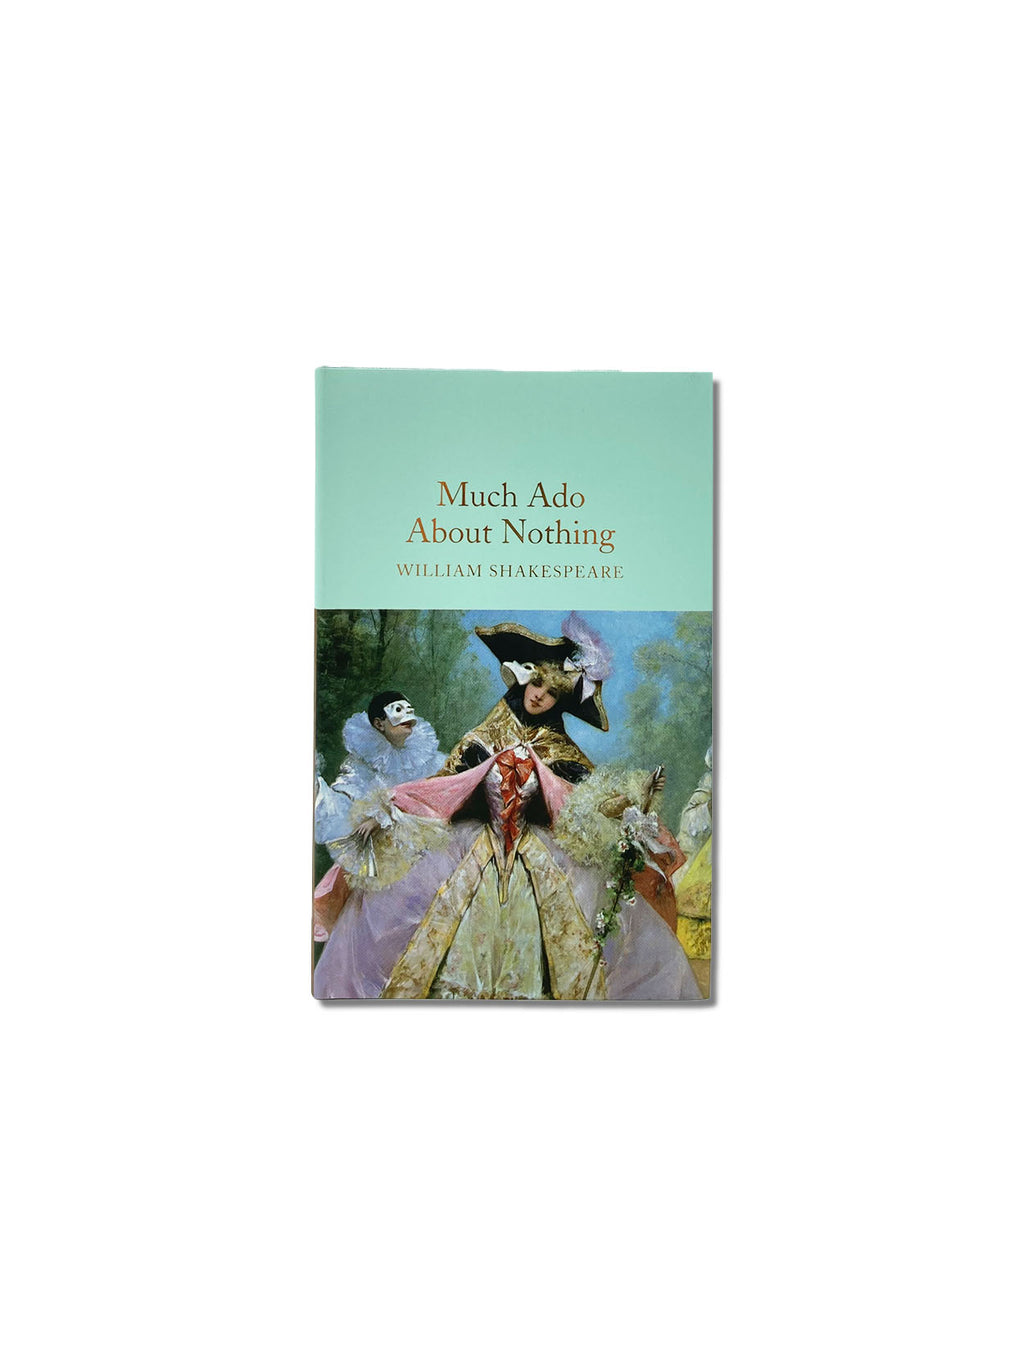 Much Ado About Nothing - Macmillan Collector's Library